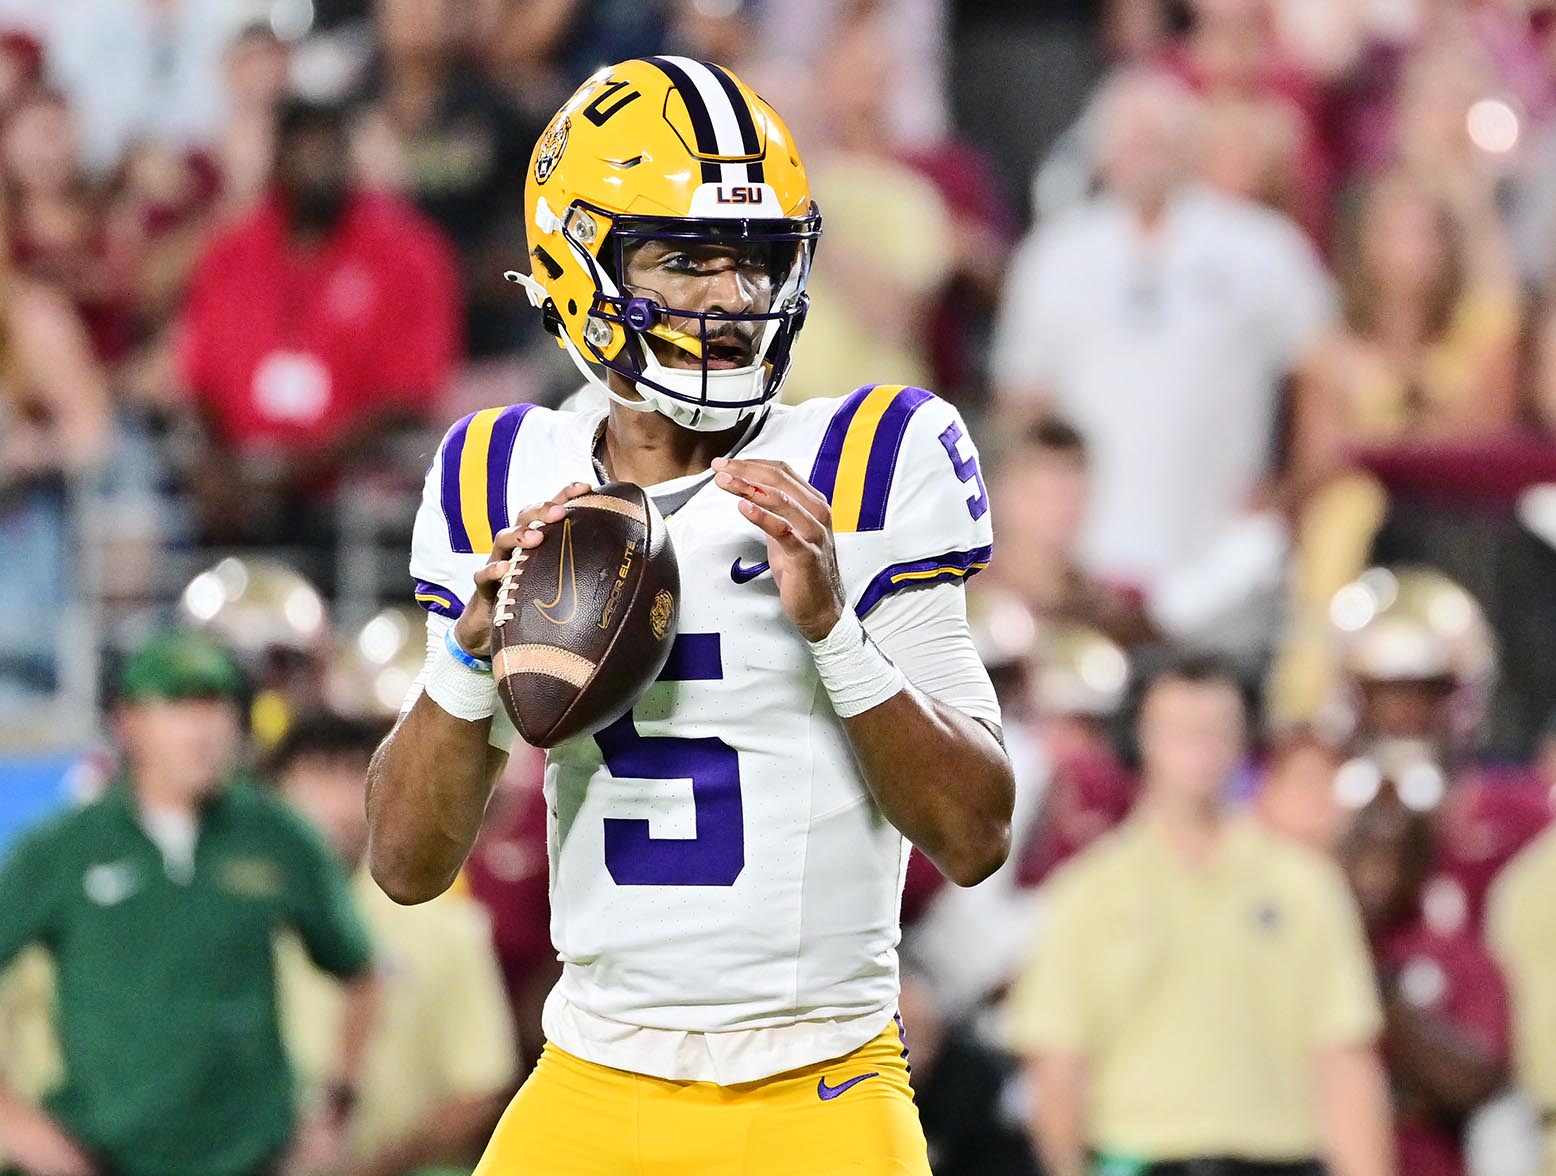 Patriots de facto GM Eliot Wolf says the Patriots expect to meet with LSU quarterback Jayden Daniels. (Photo by Julio Aguilar/Getty Images)